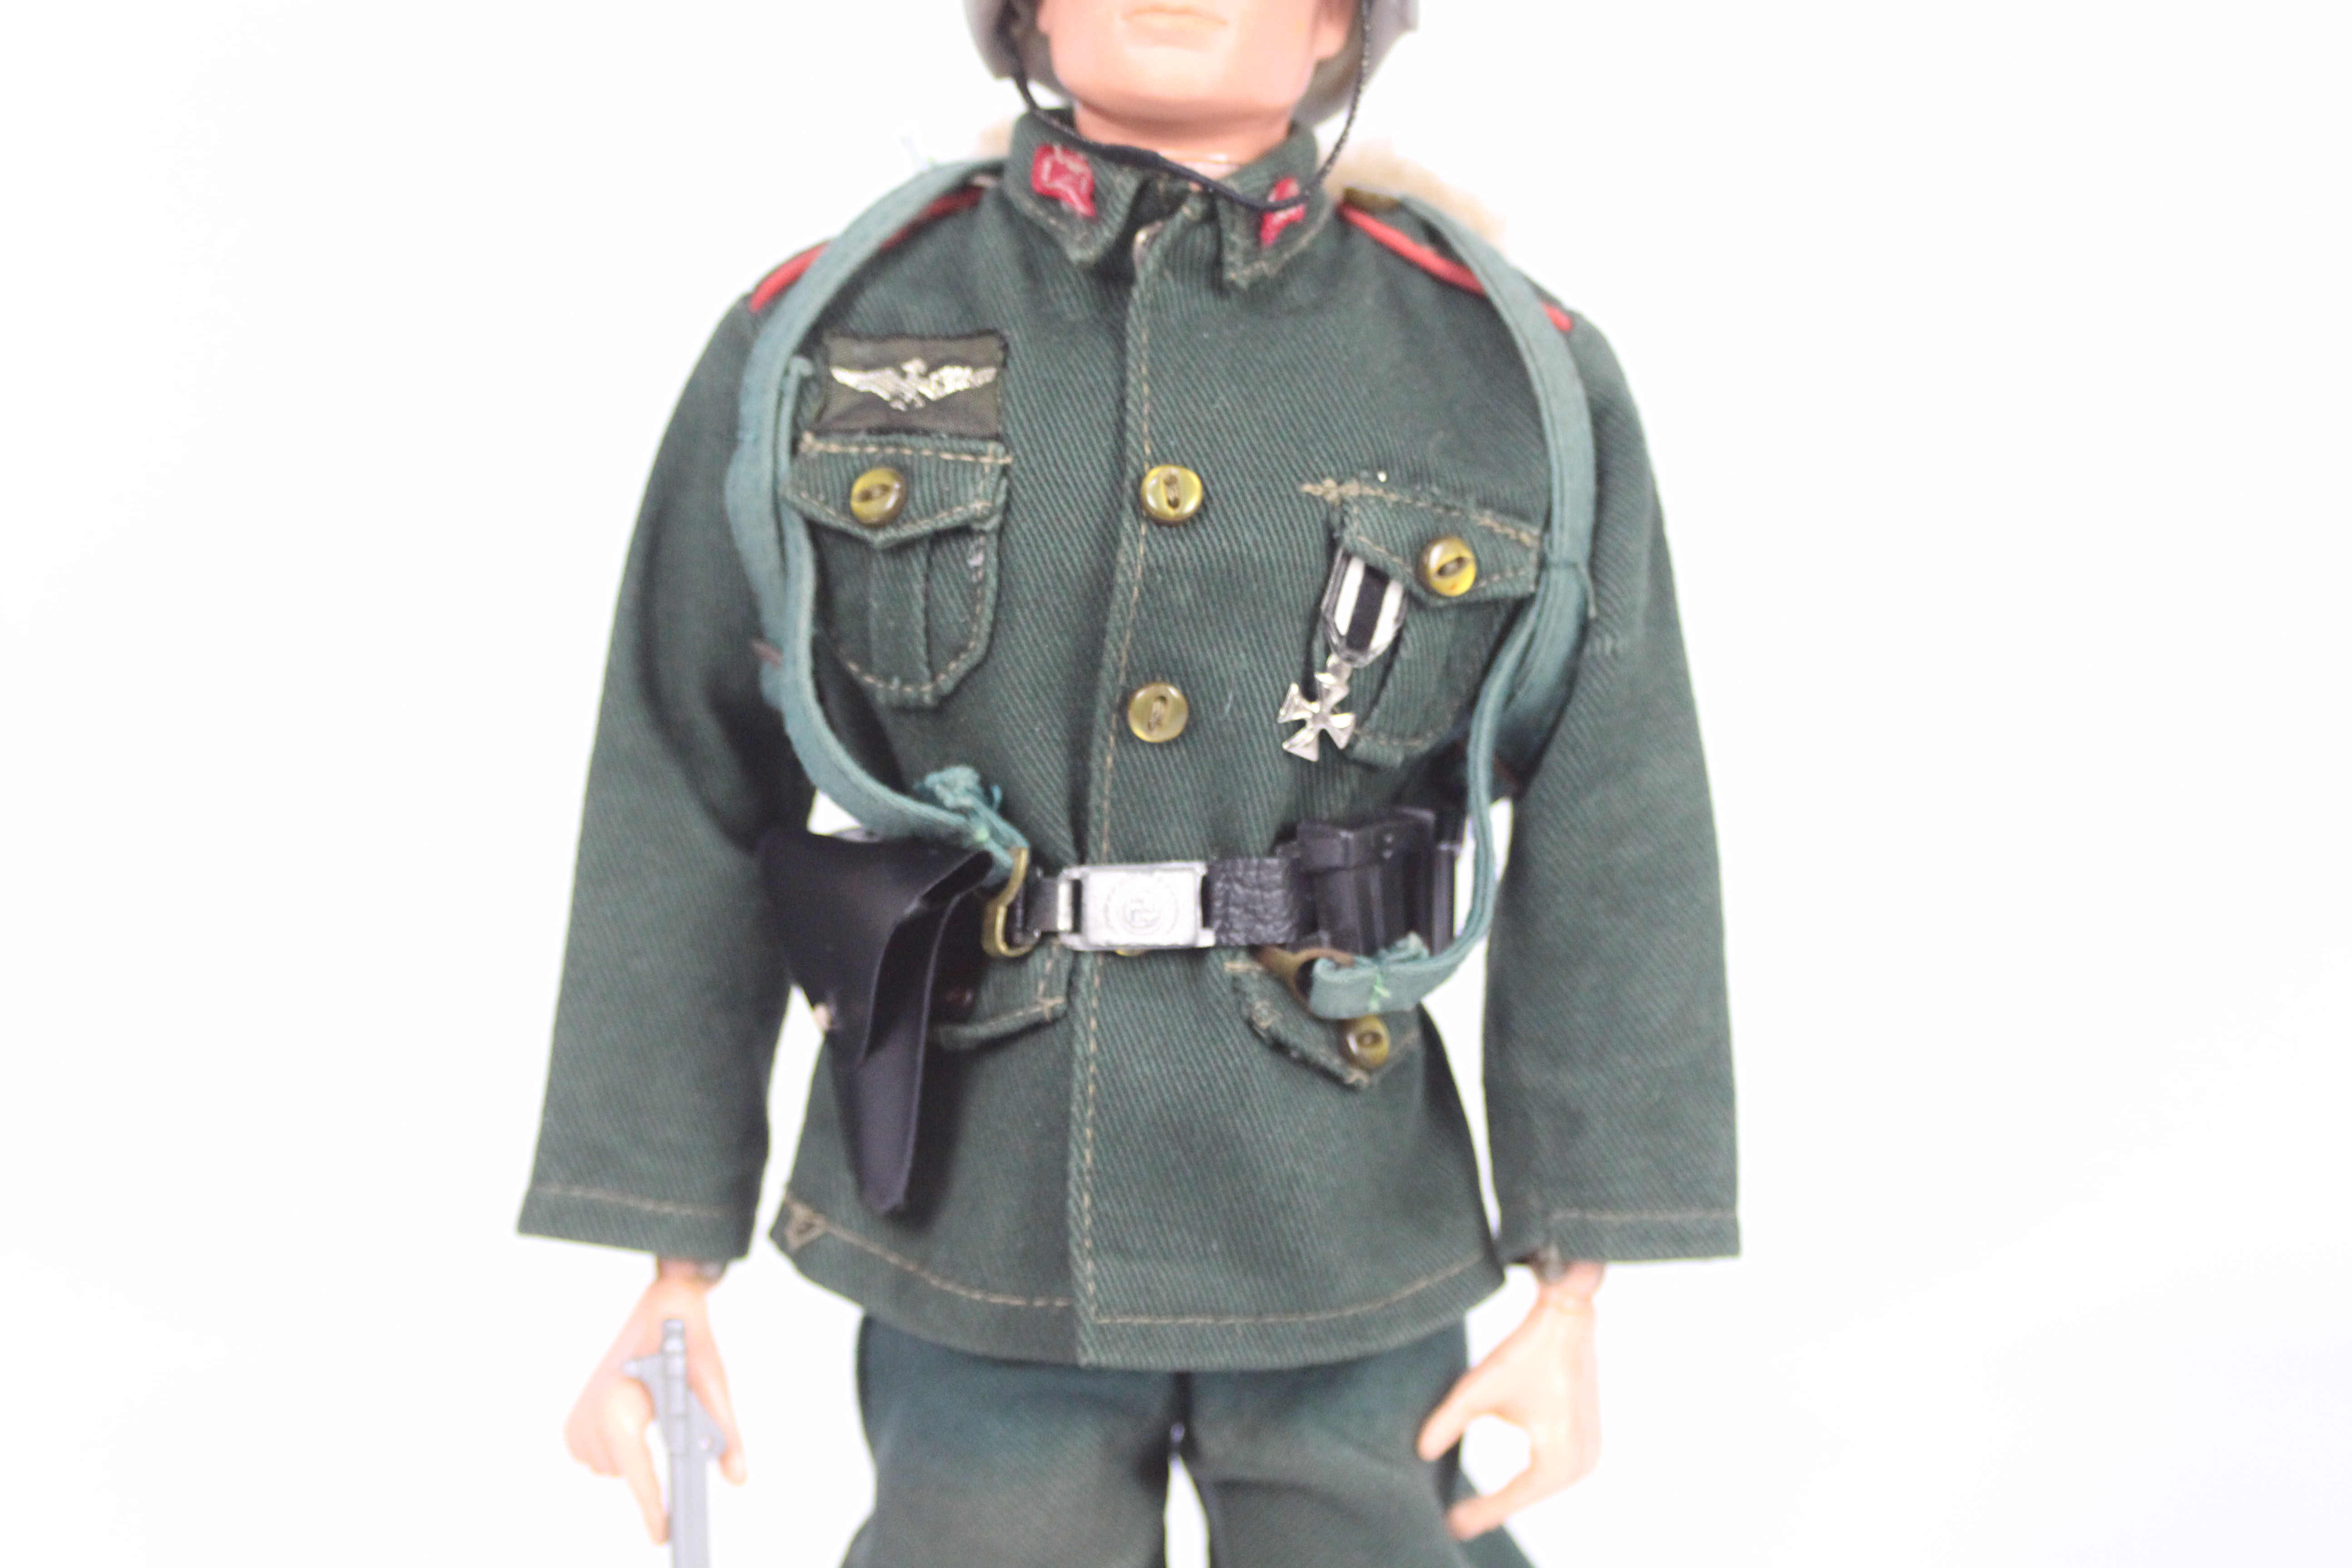 Palitoy, Action Man - A Palitoy Action Man in German Stormtrooper outfit. - Image 3 of 9